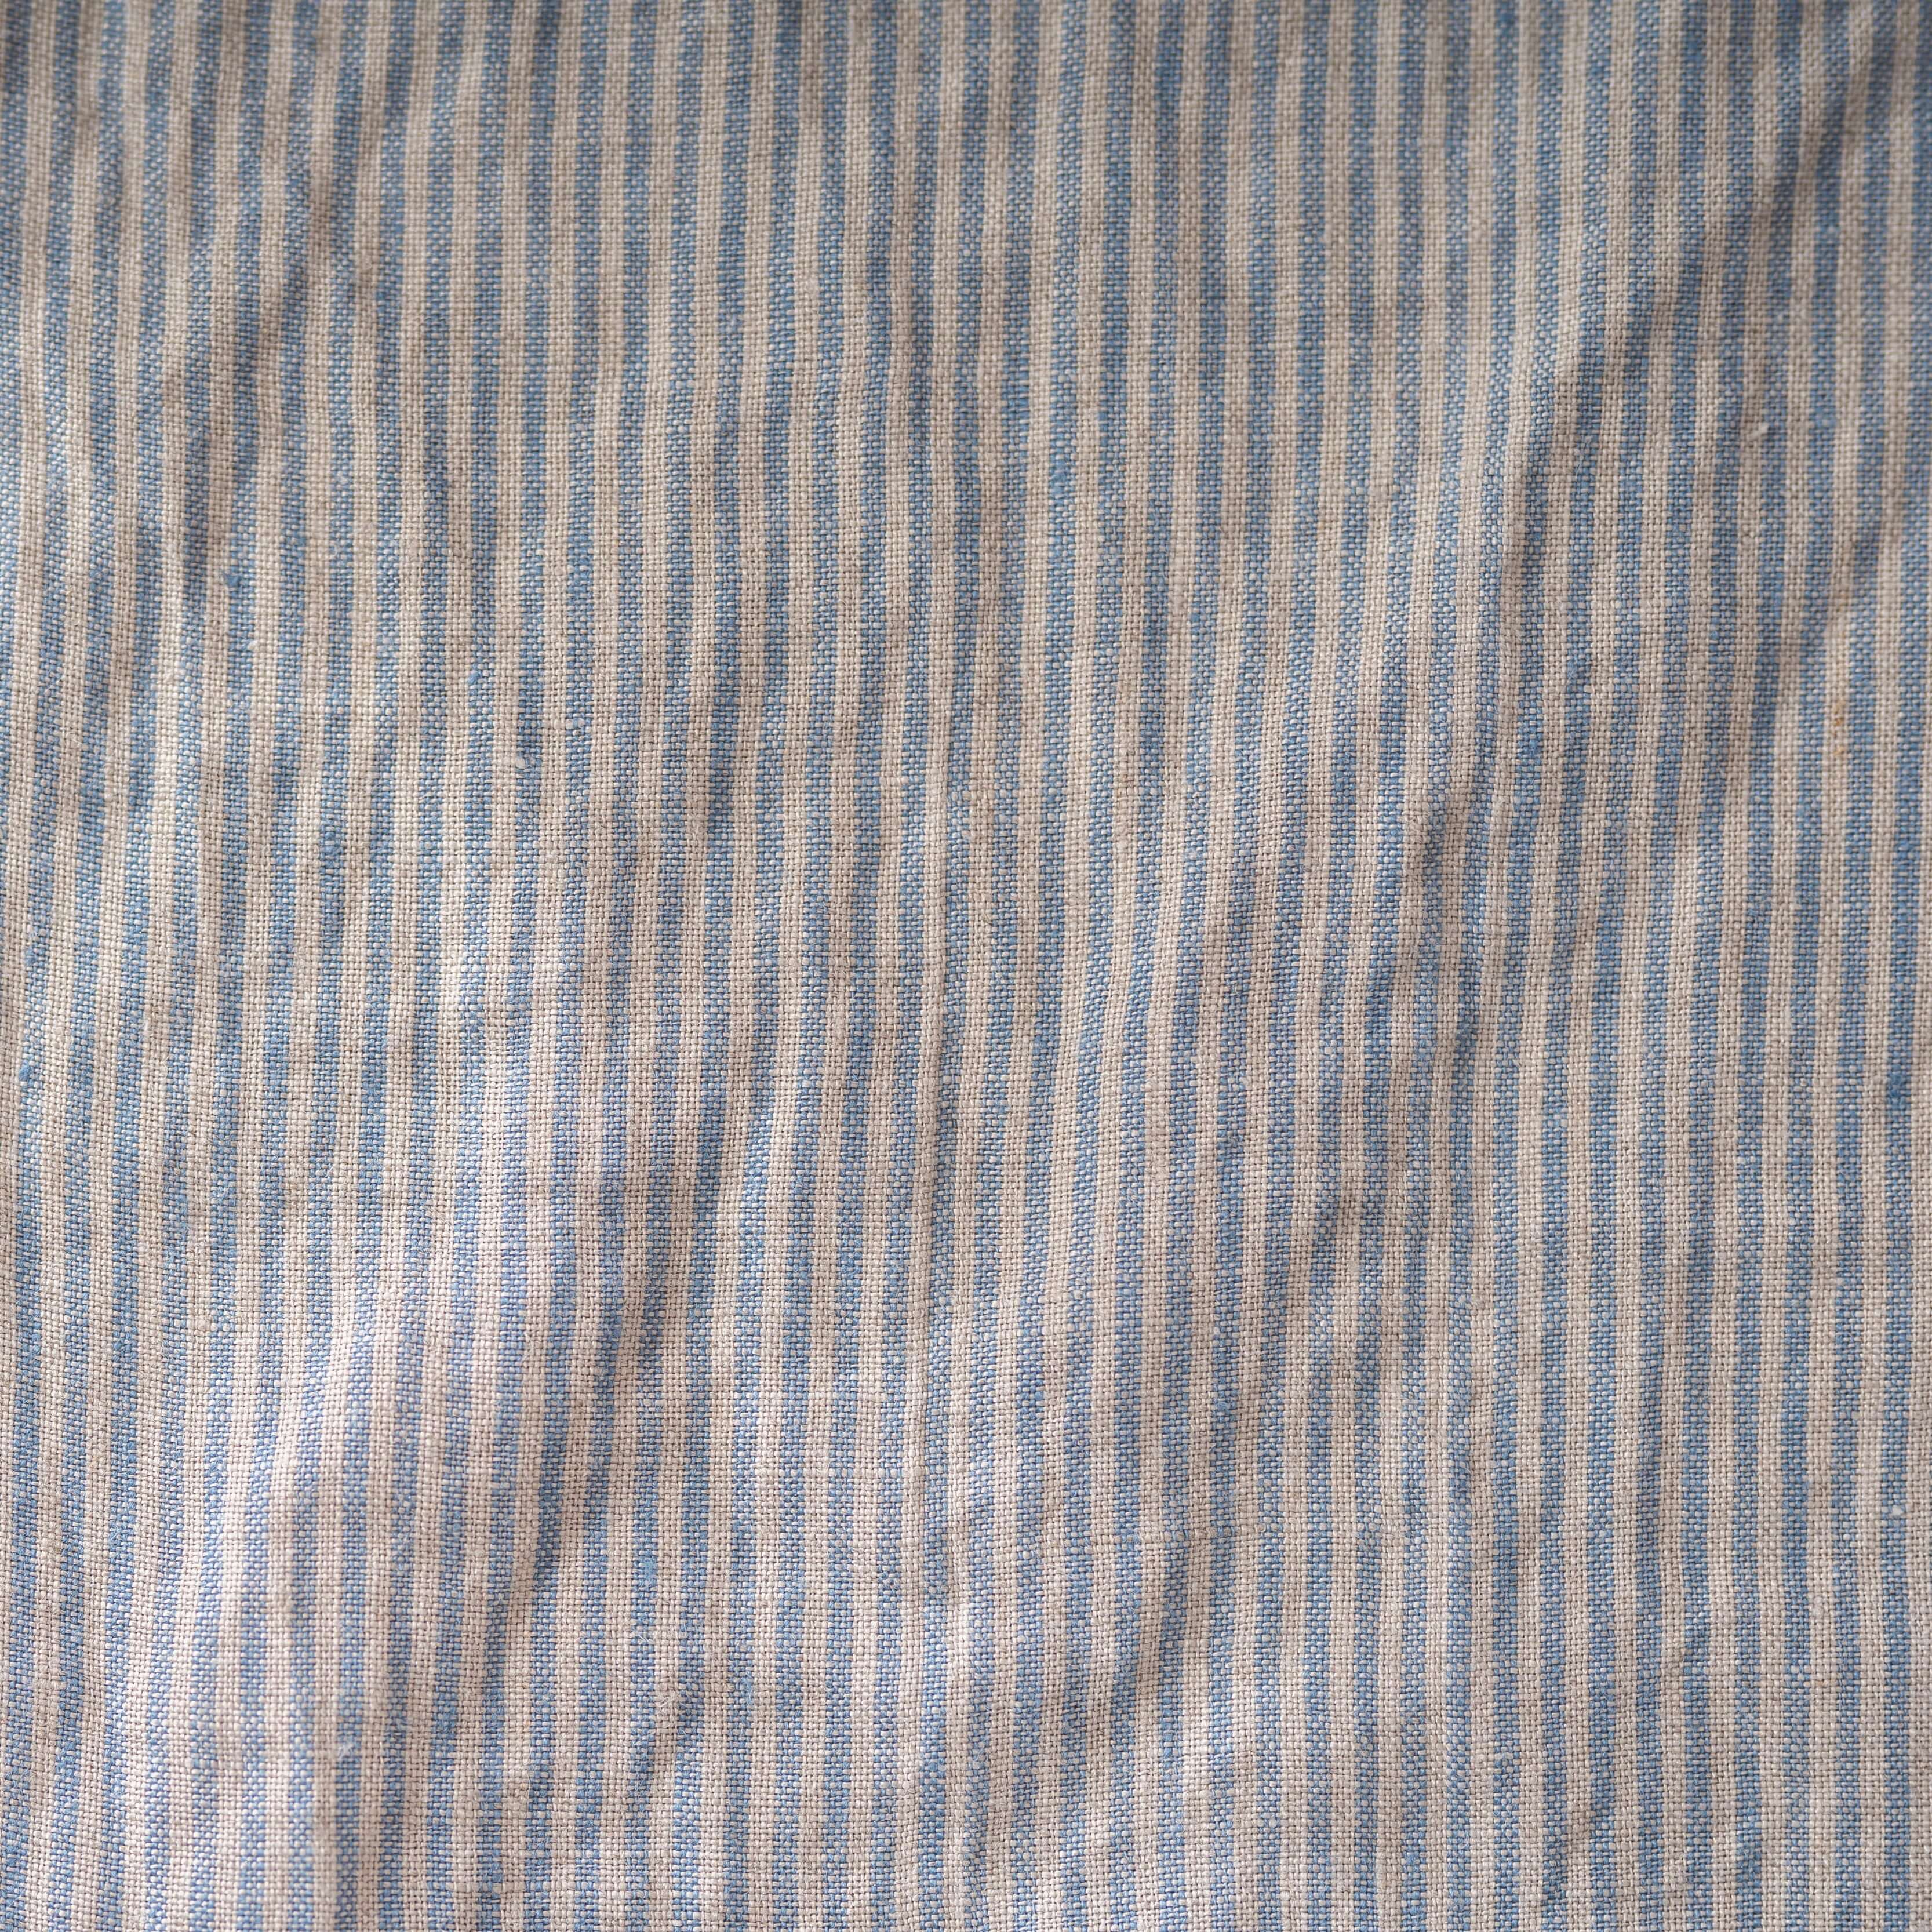 Softened & Washed Striped Linen Fabric UK Store